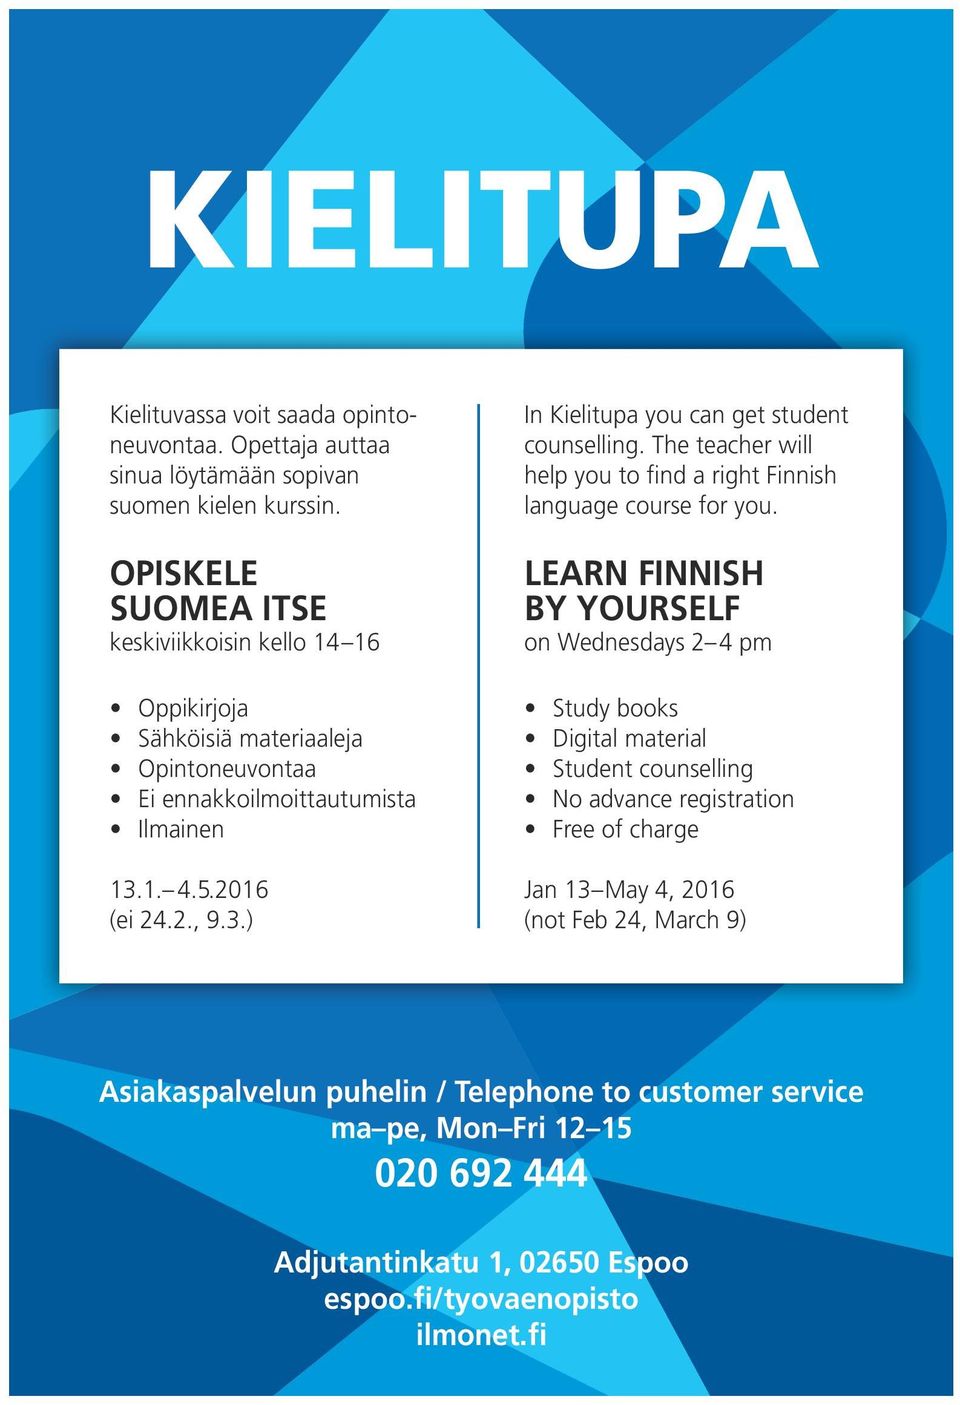 1. 4.5.2016 (ei 24.2., 9.3.) In Kielitupa you can get student counselling. The teacher will help you to find a right Finnish language course for you.